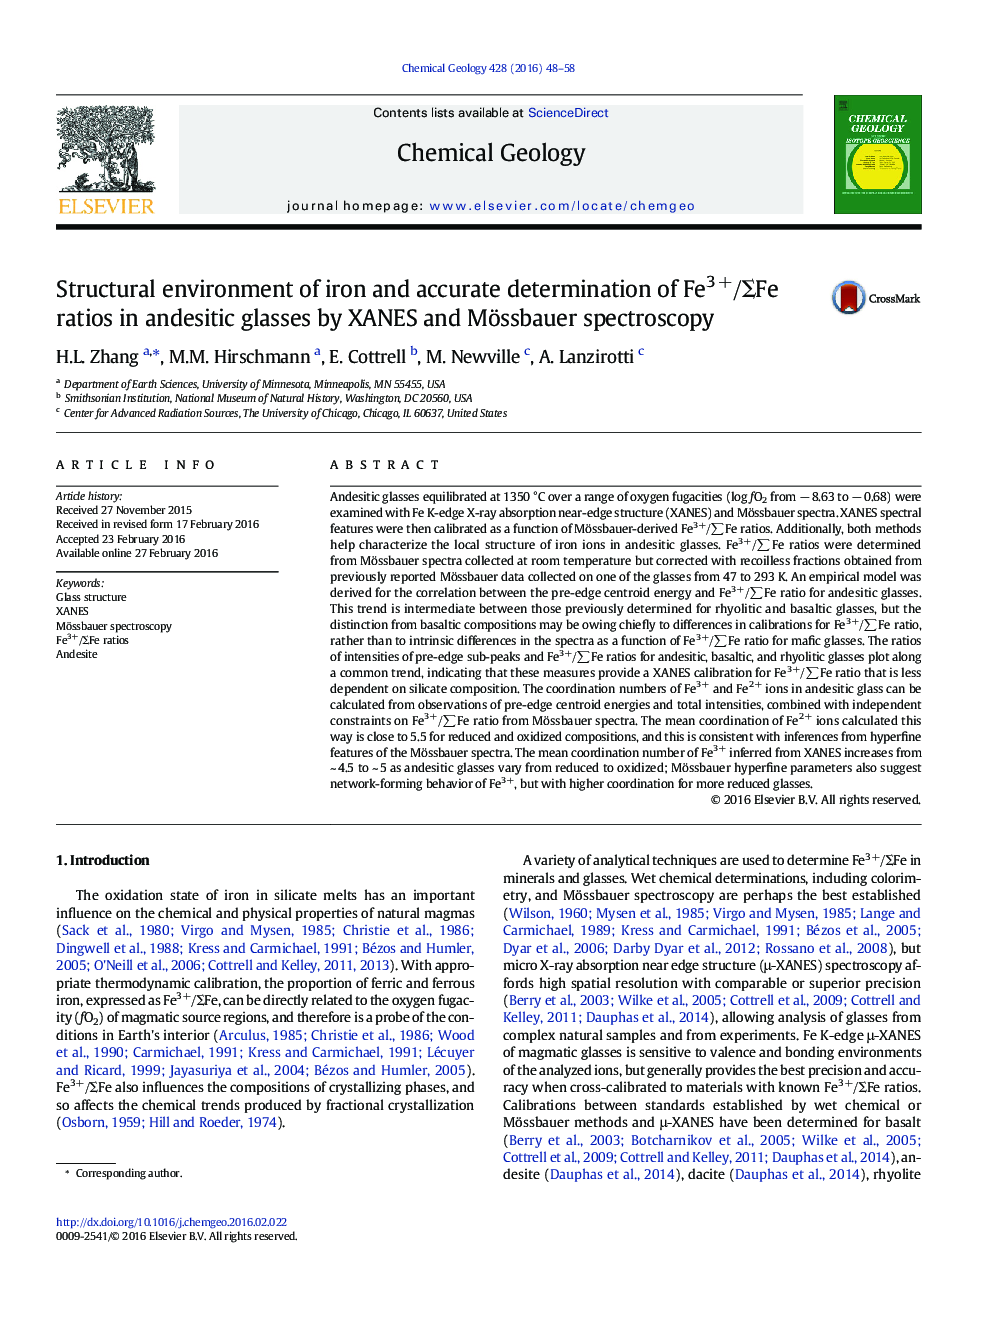 Structural environment of iron and accurate determination of Fe3Â +/Î£Fe ratios in andesitic glasses by XANES and Mössbauer spectroscopy